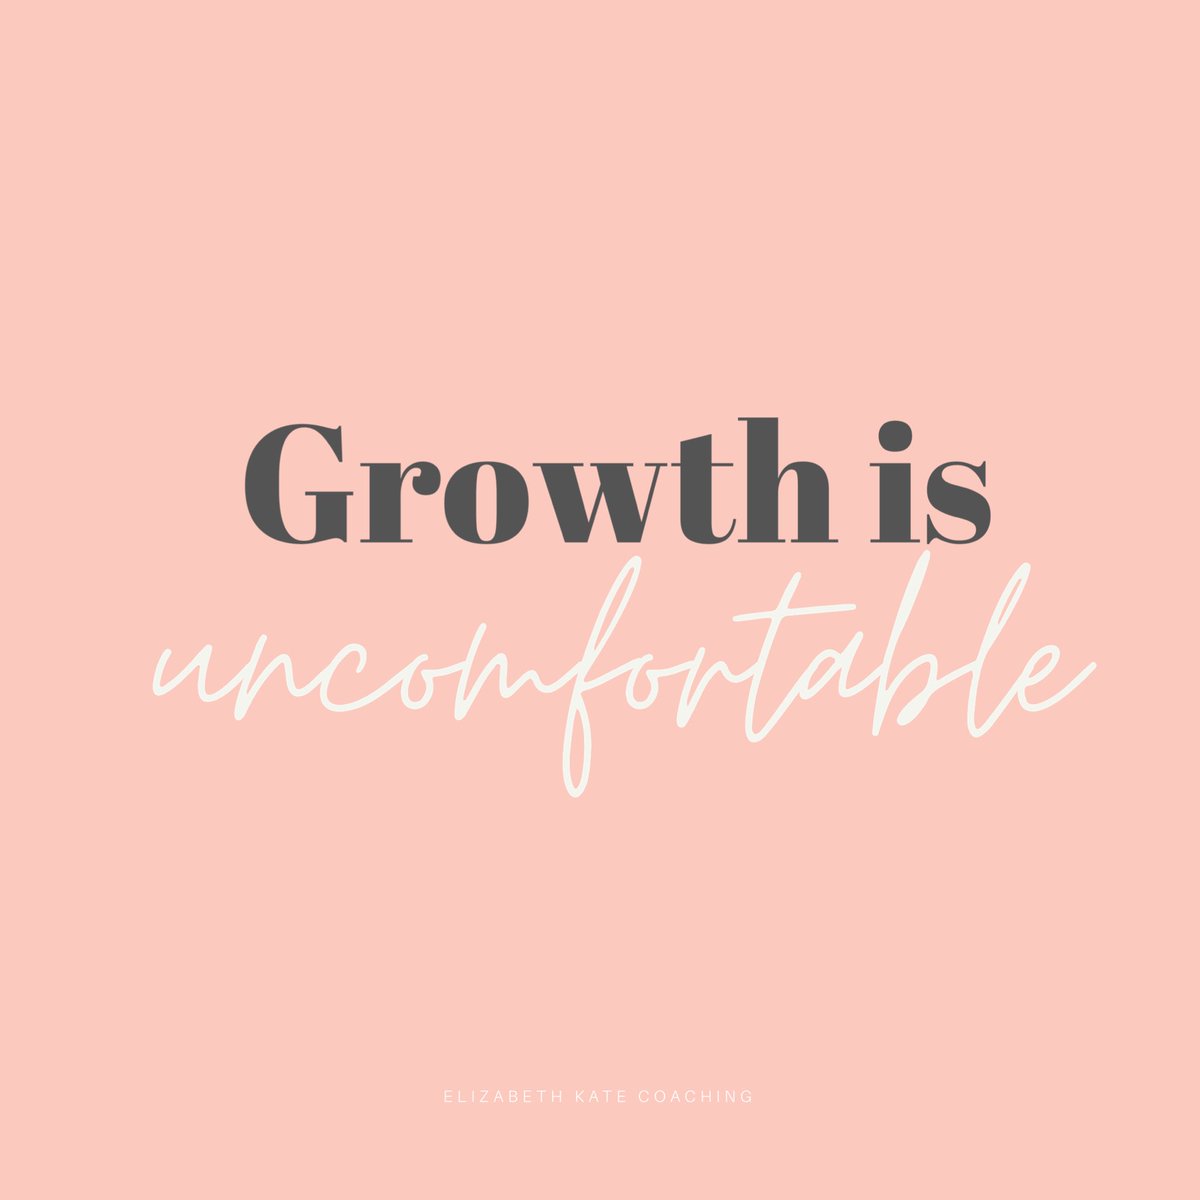 There is a bigger picture to seasons of challenges. How do you choose to take on seasons that are uncomfortable? How do you choose to take on those feelings of being uncomfortable; do you go over it, around it or through it? #growthmindset #growthisuncomfortable